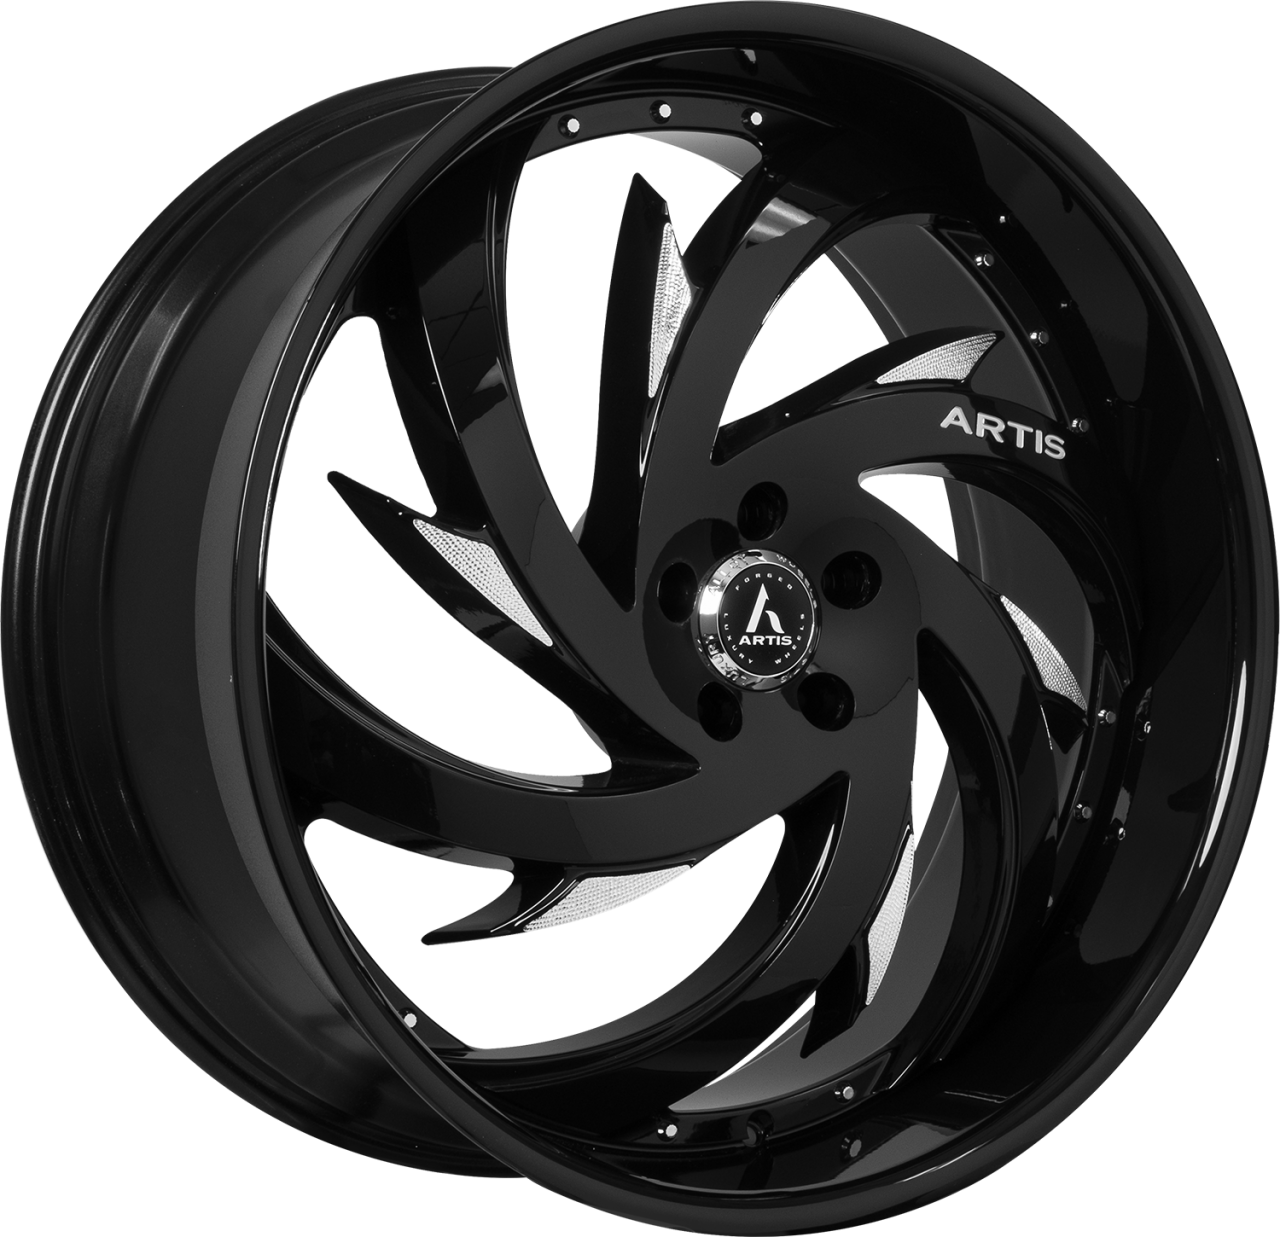 Artis Forged Spada wheel with Brilliant Etched finish